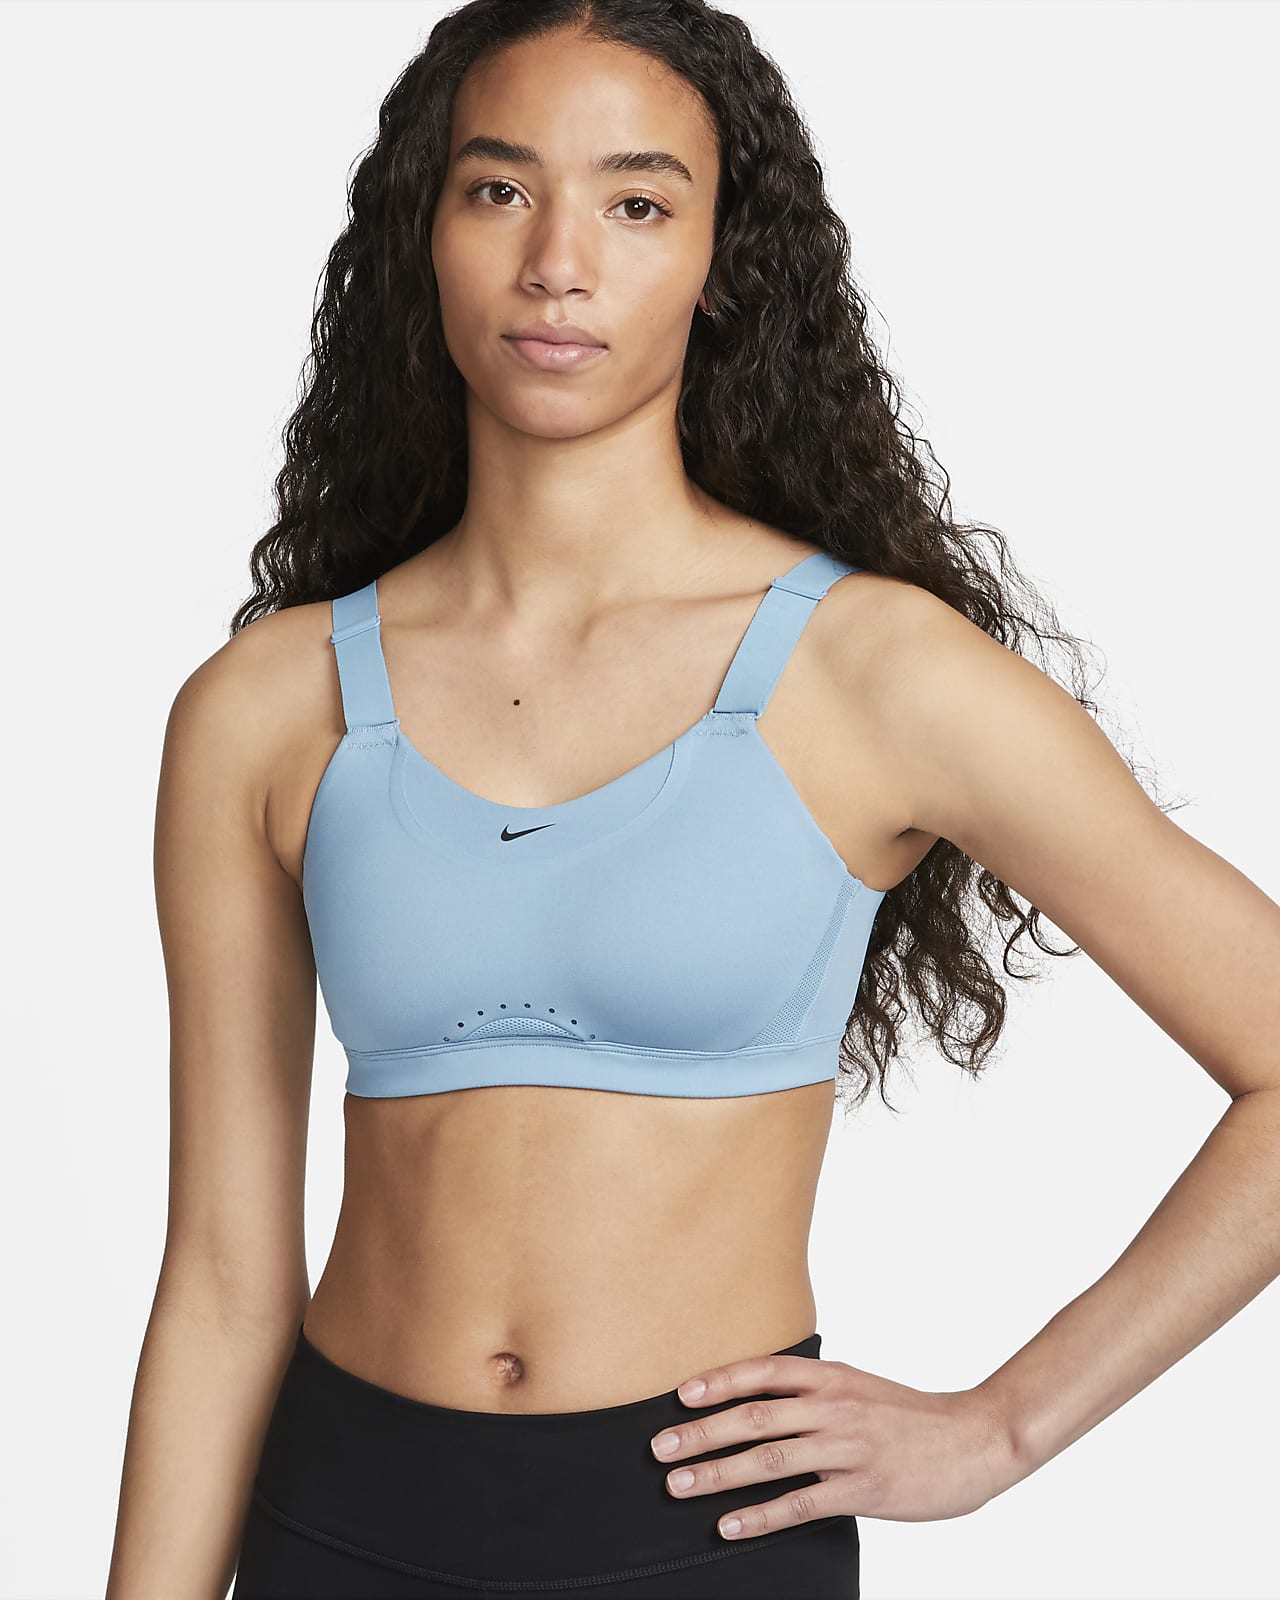 Andrew Halliday Medaille Bank Nike Alpha Women's High-Support Padded Adjustable Sports Bra. Nike LU